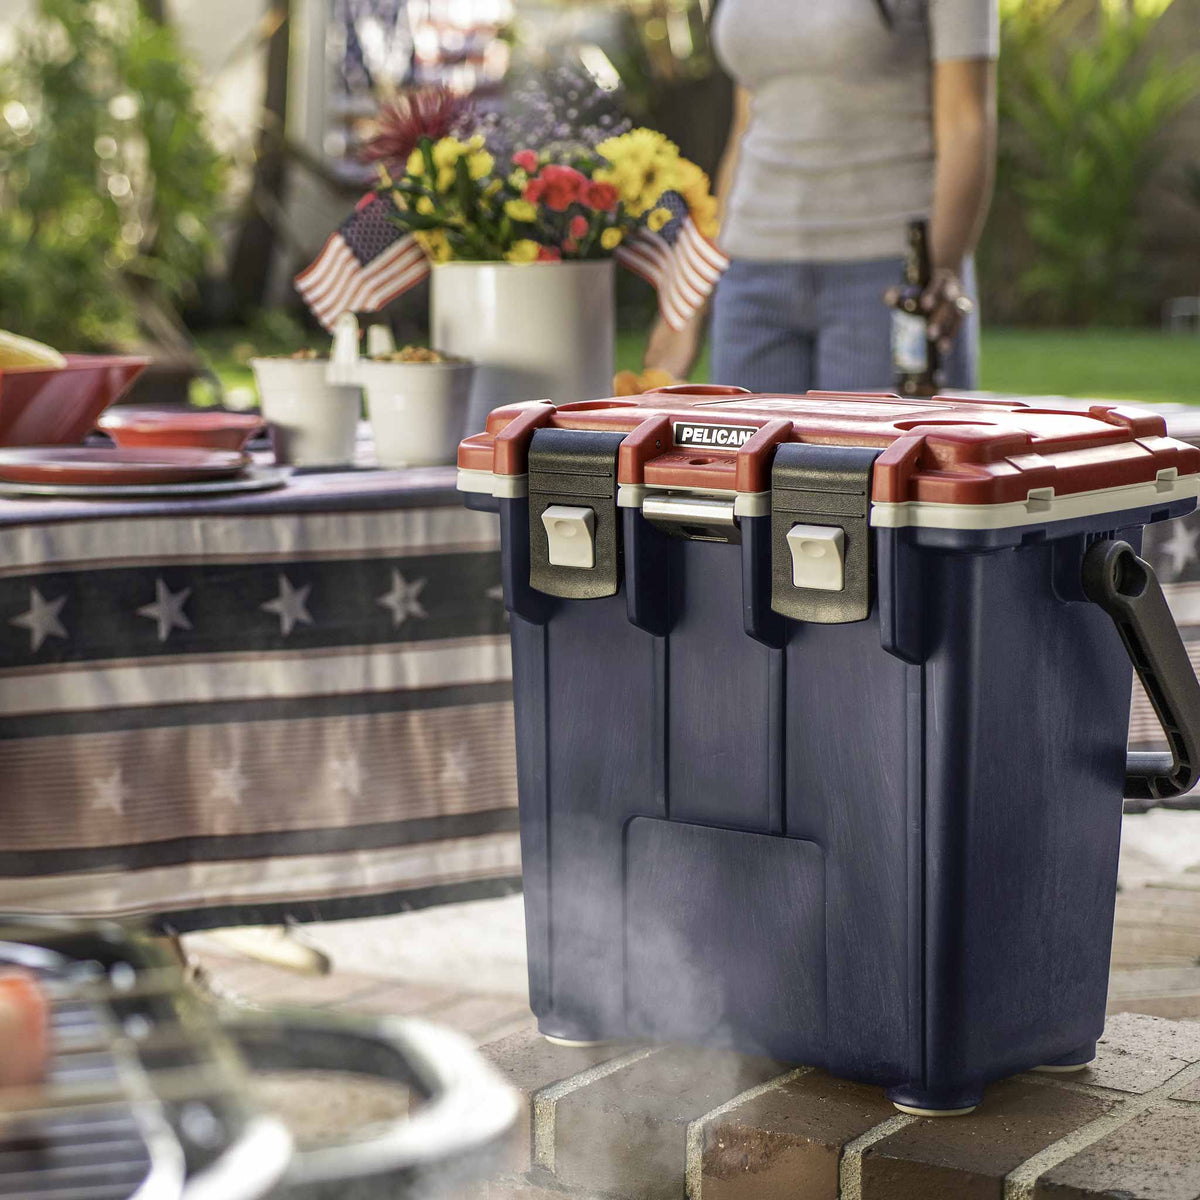 20Q-5-BLURED-WHT 20QT Pelican Elite Cooler being used at an outdoor cookout.